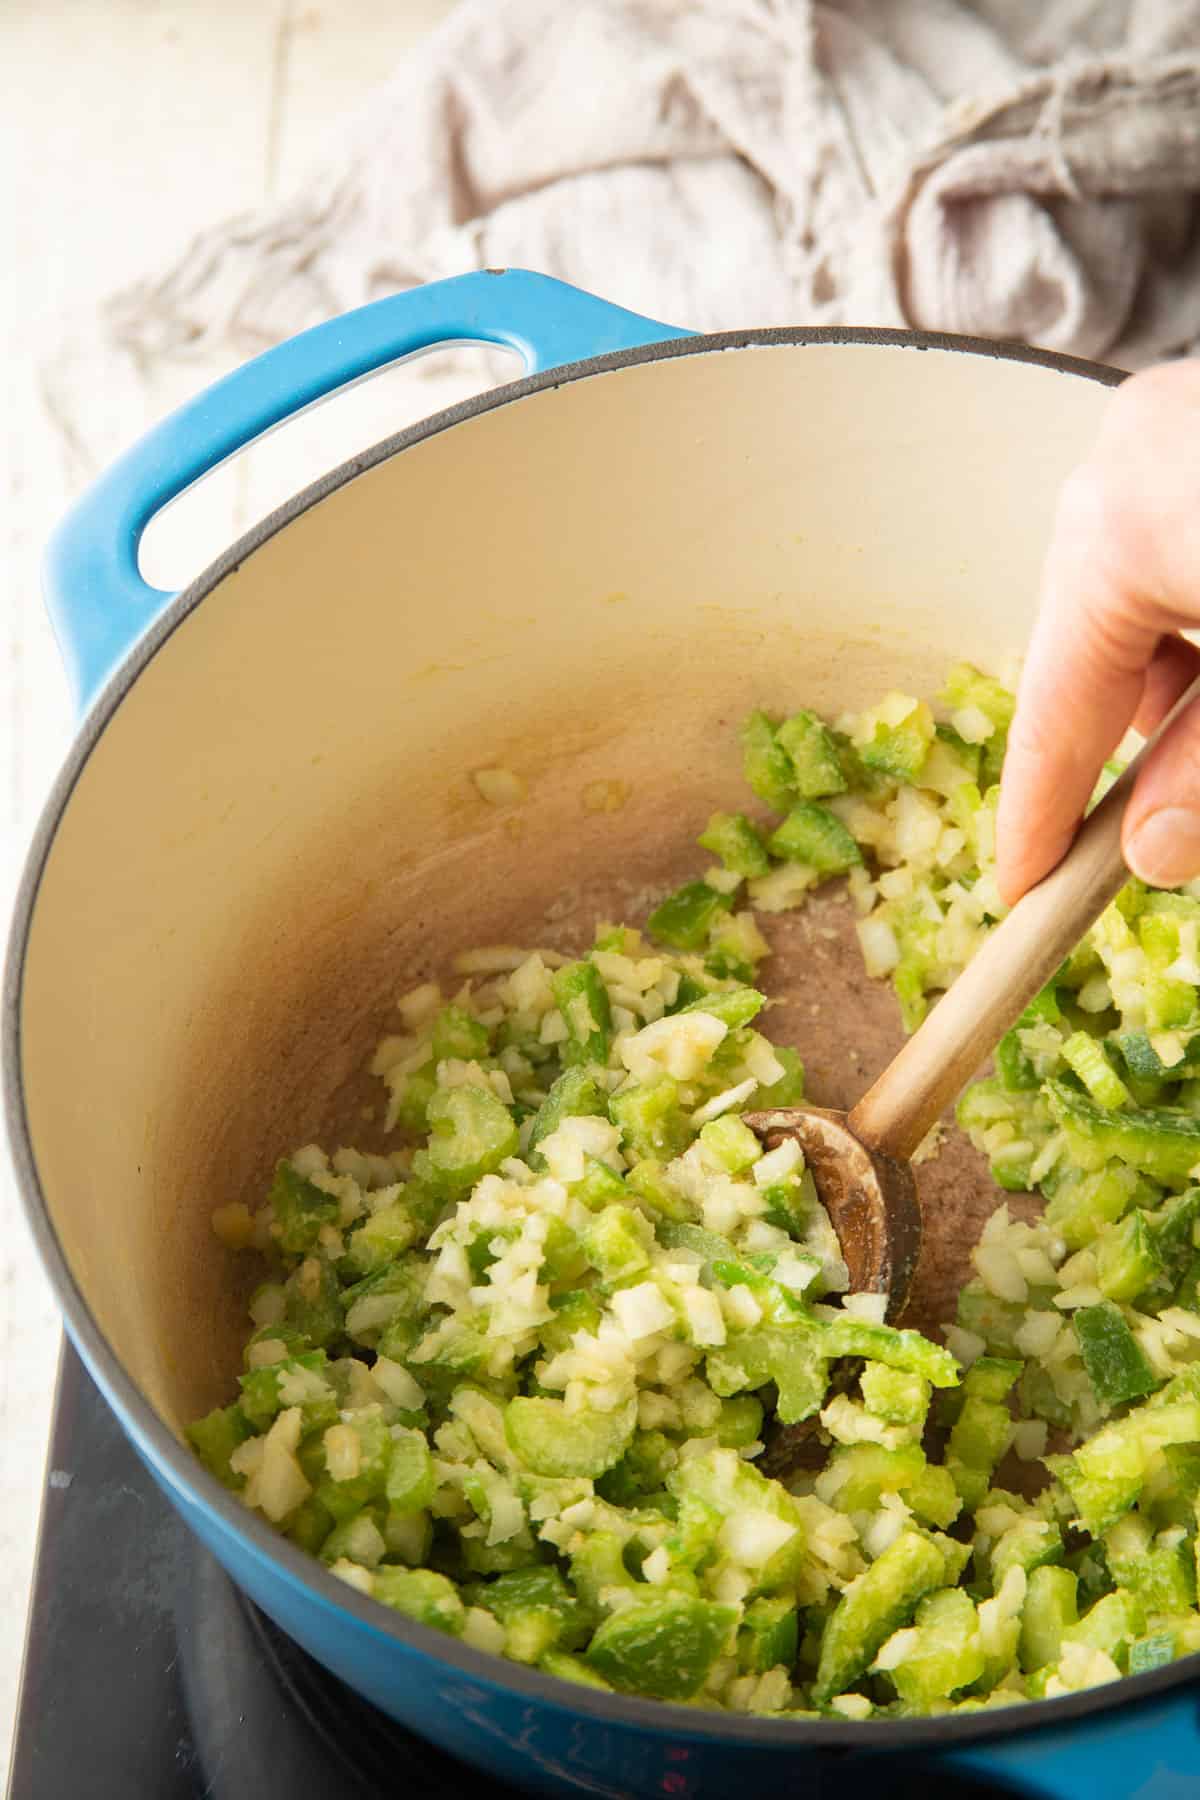 Hand stirring a pot of diced onions, peppers, and celery cooking in a roux.